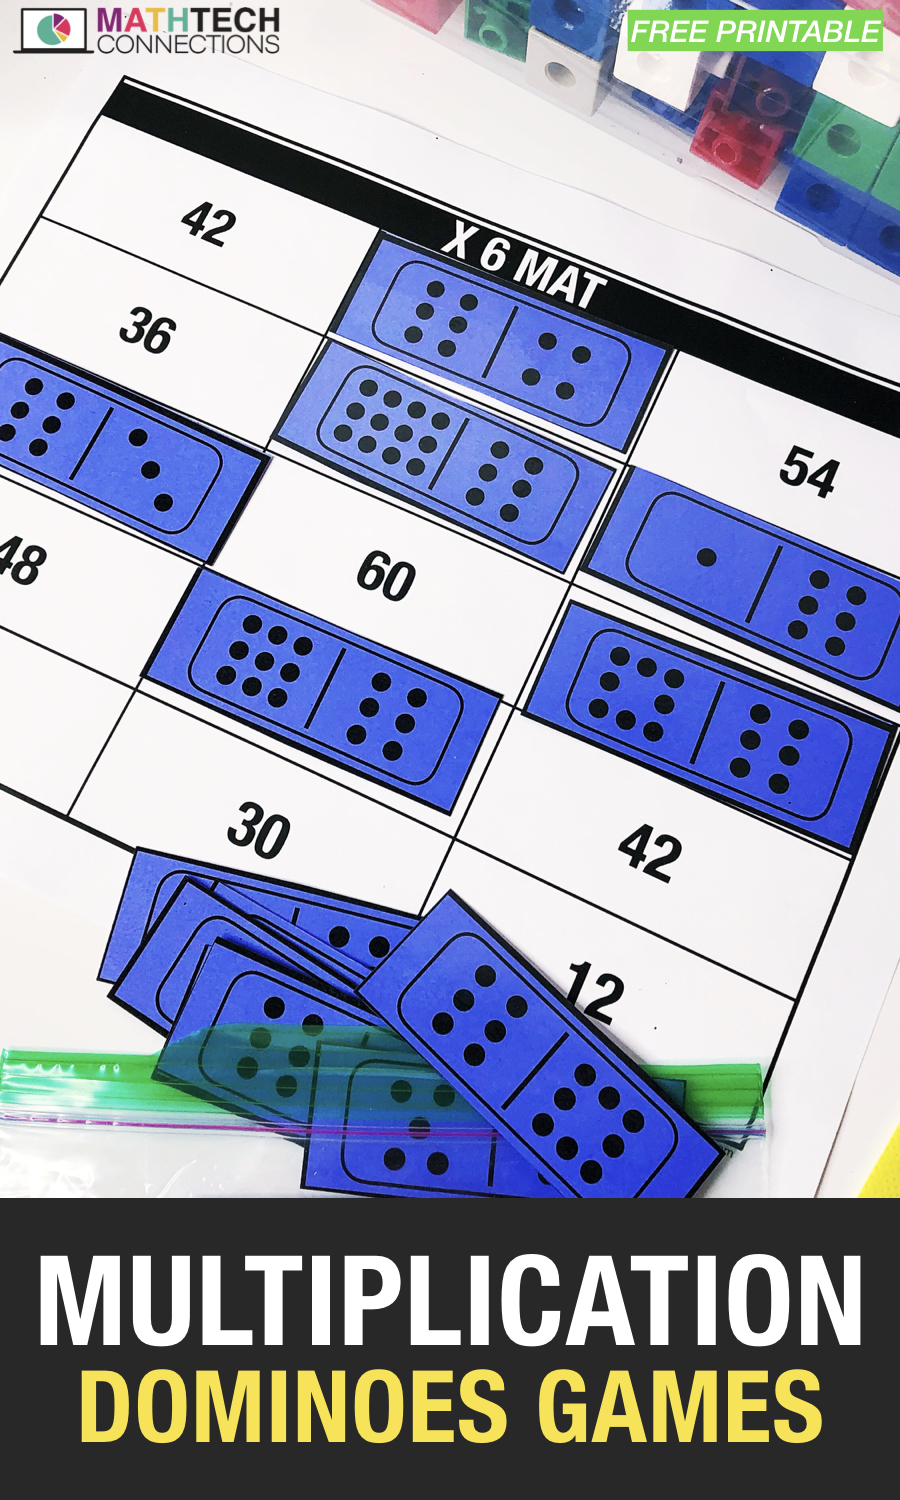  Multiplication Dominoes Game Free Printable Math Tech Connections